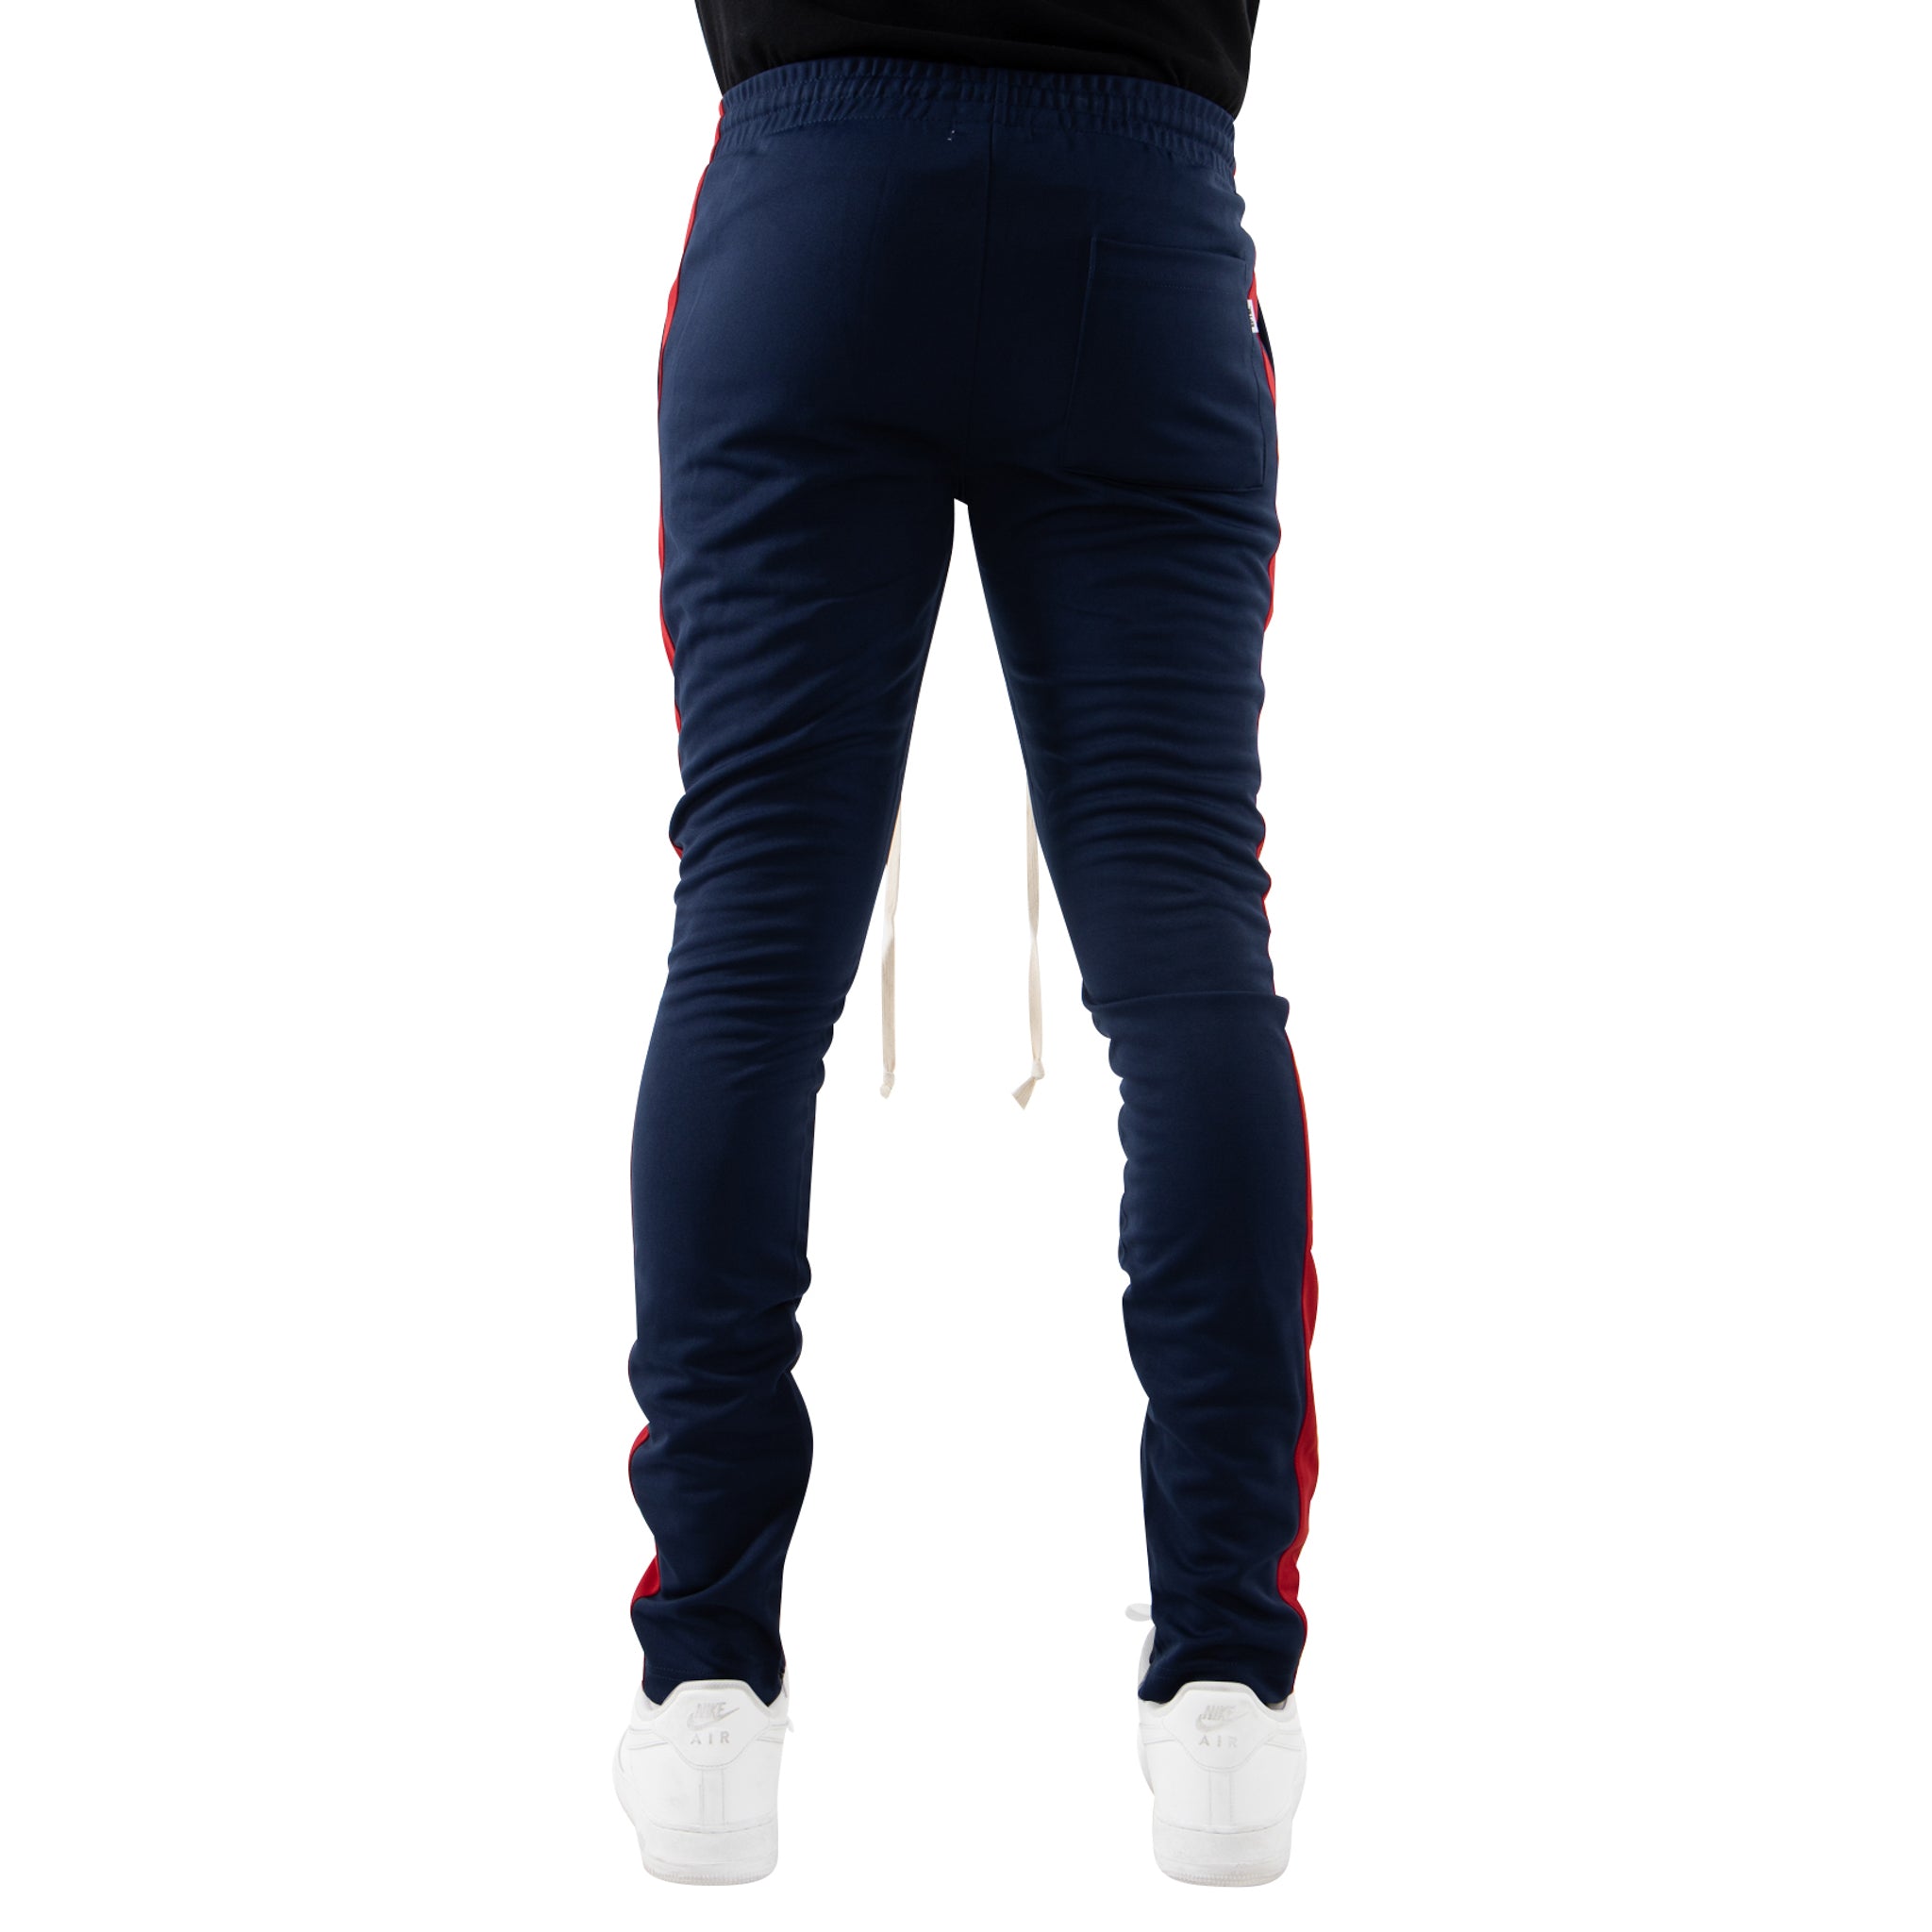 EPTM TRACK PANTS-NAVY/RED